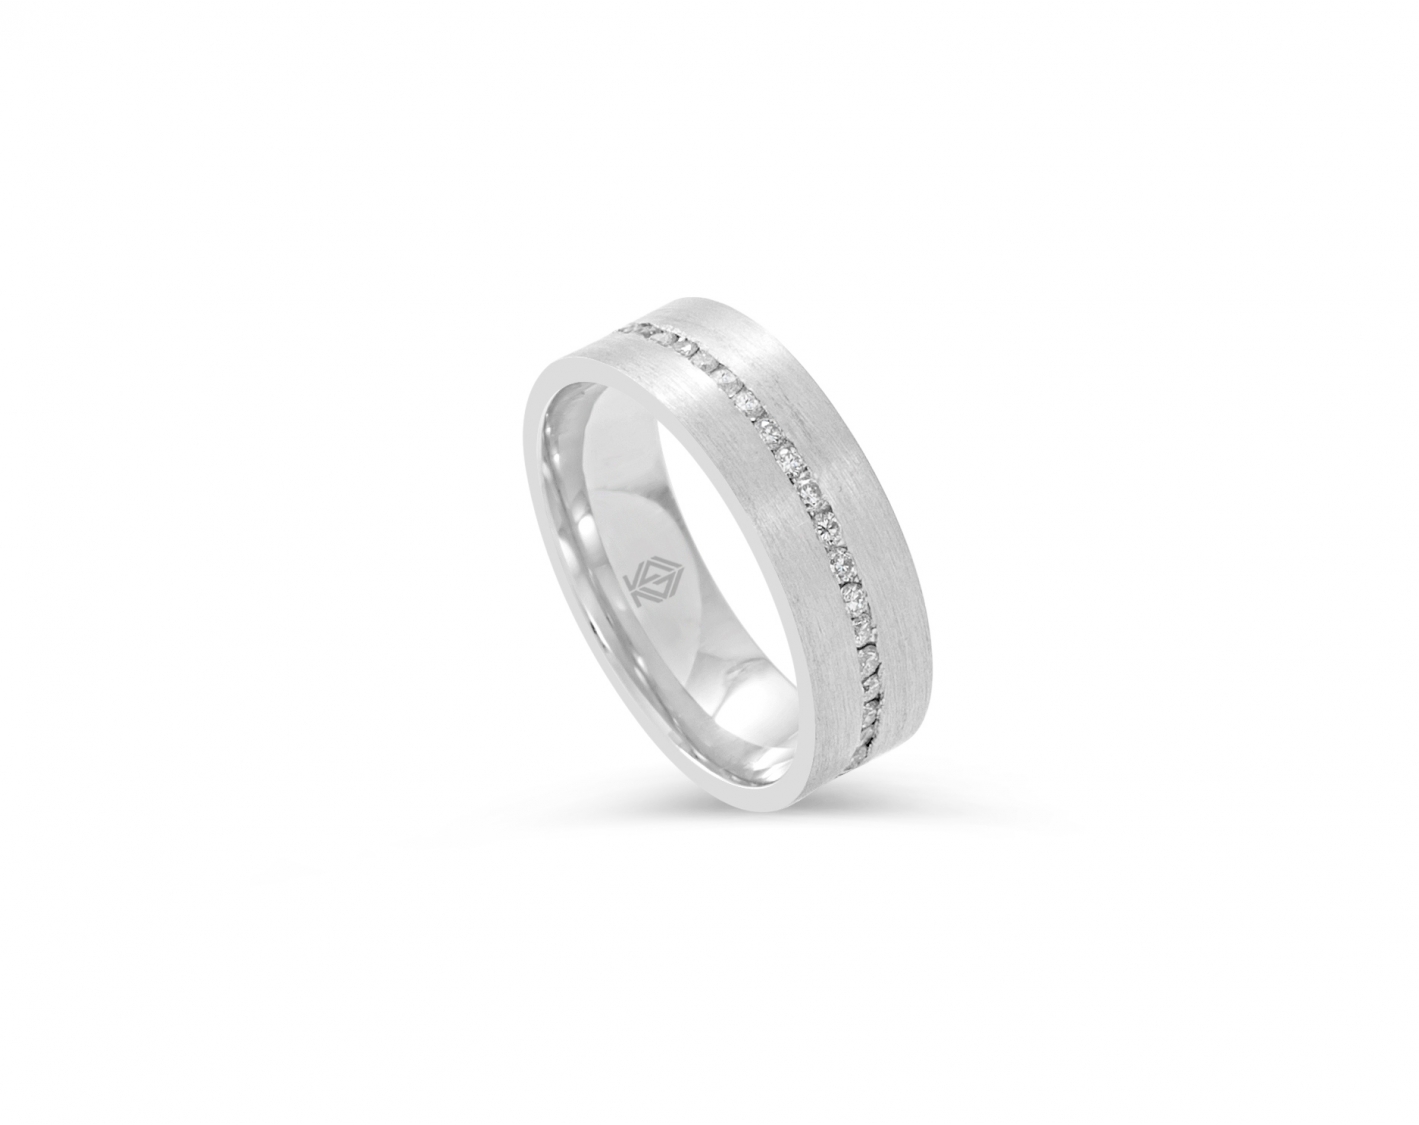 18k white gold 6mm matte wedding band with diamonds and a shiny inlay